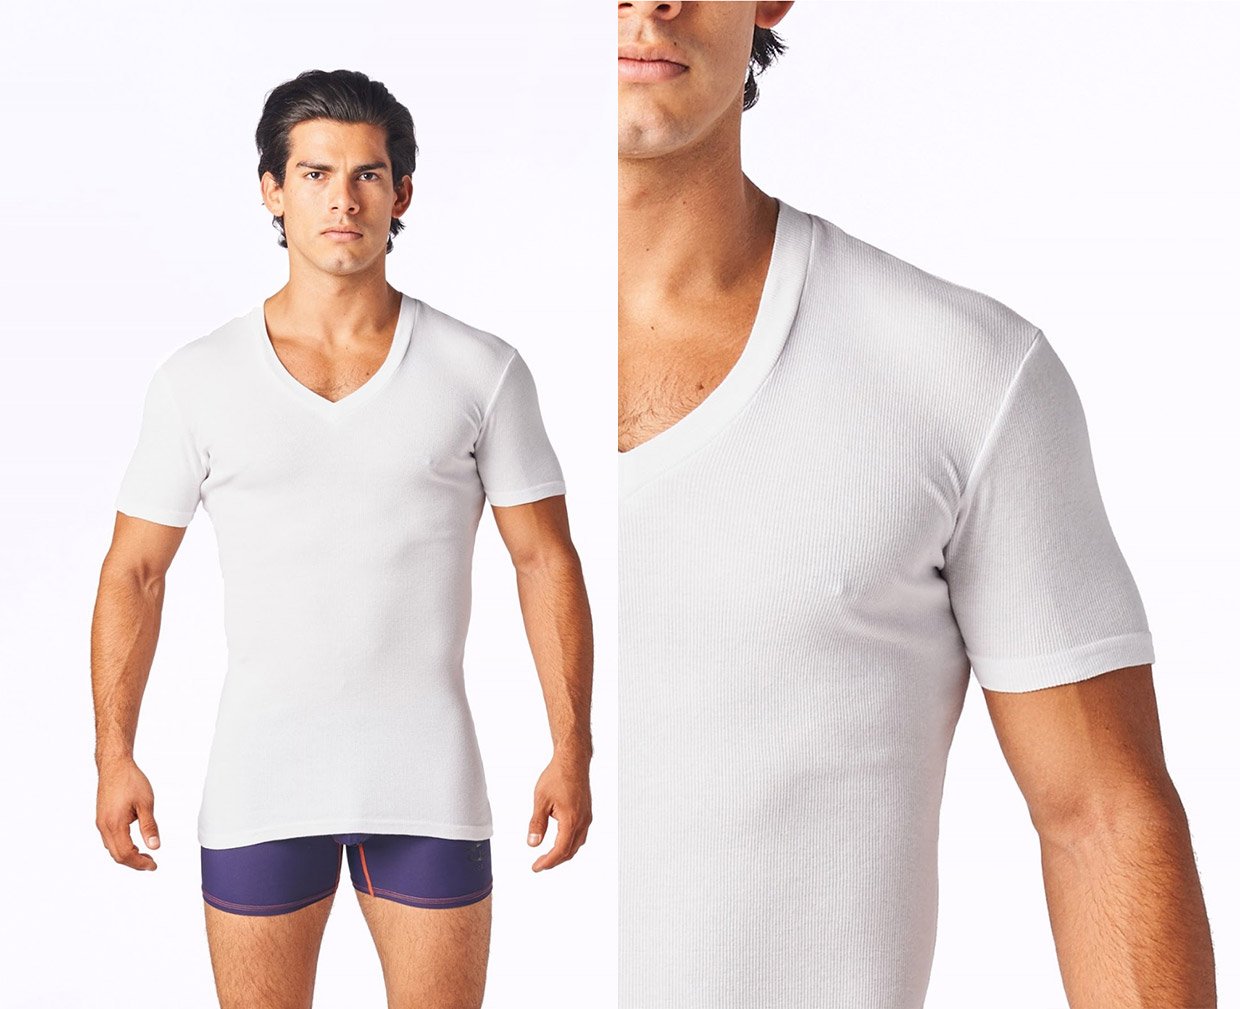 Save 20% on Great Undershirts from RibbedTee